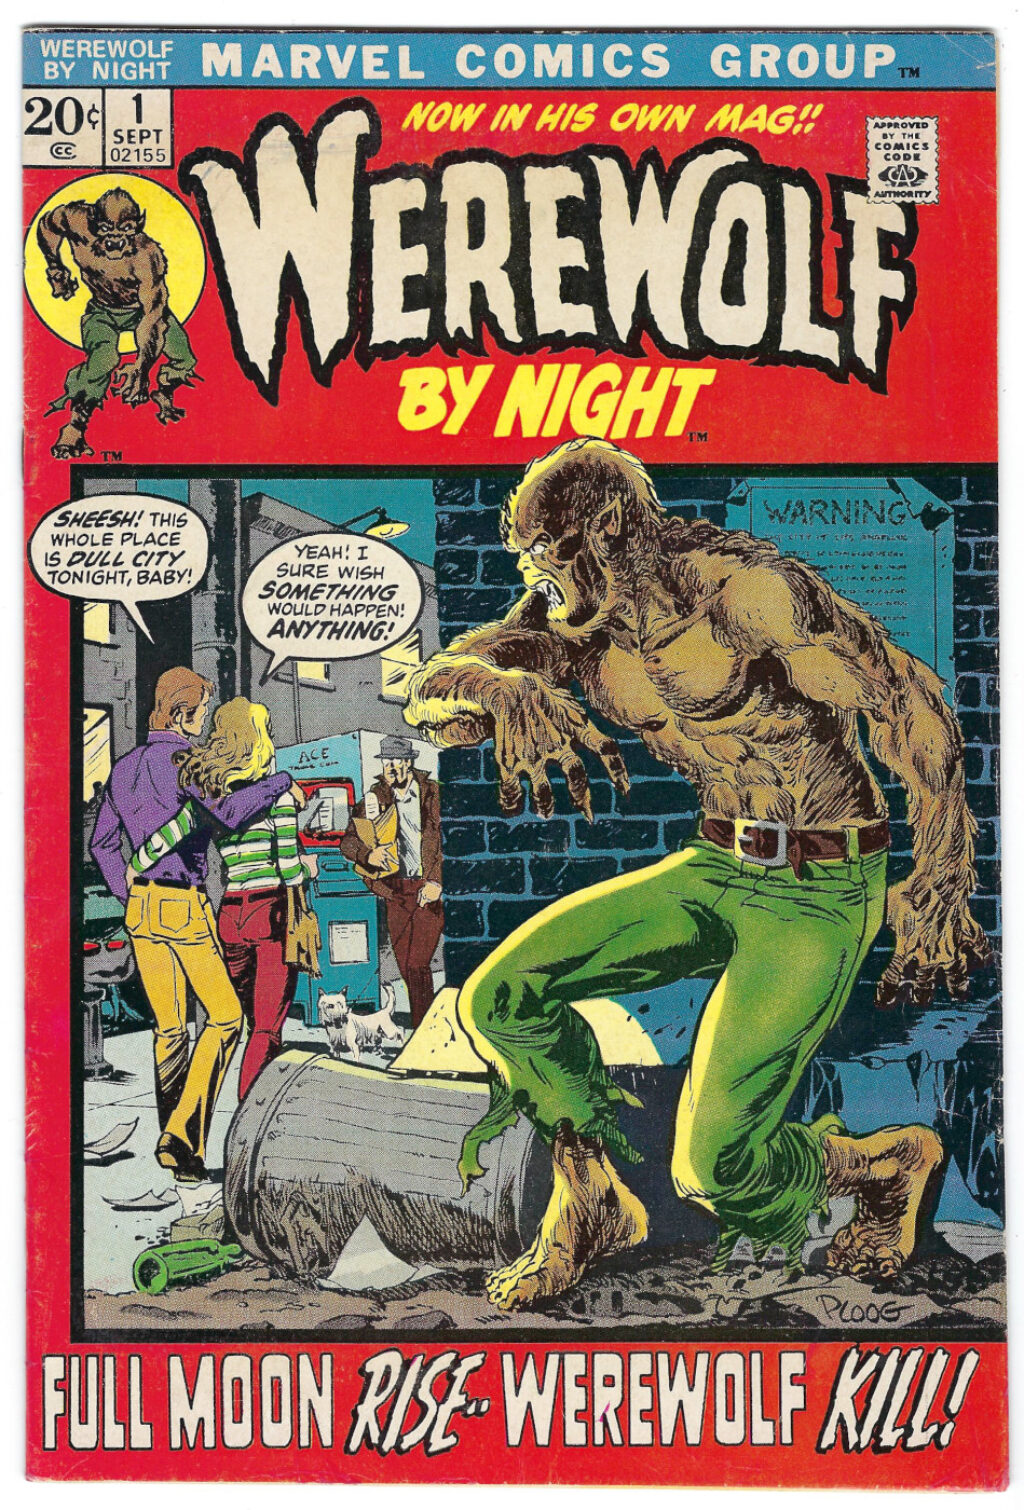 Marvel Comics Werewolf By Night (1972) #1: 1st Appearance in Solo Title 1